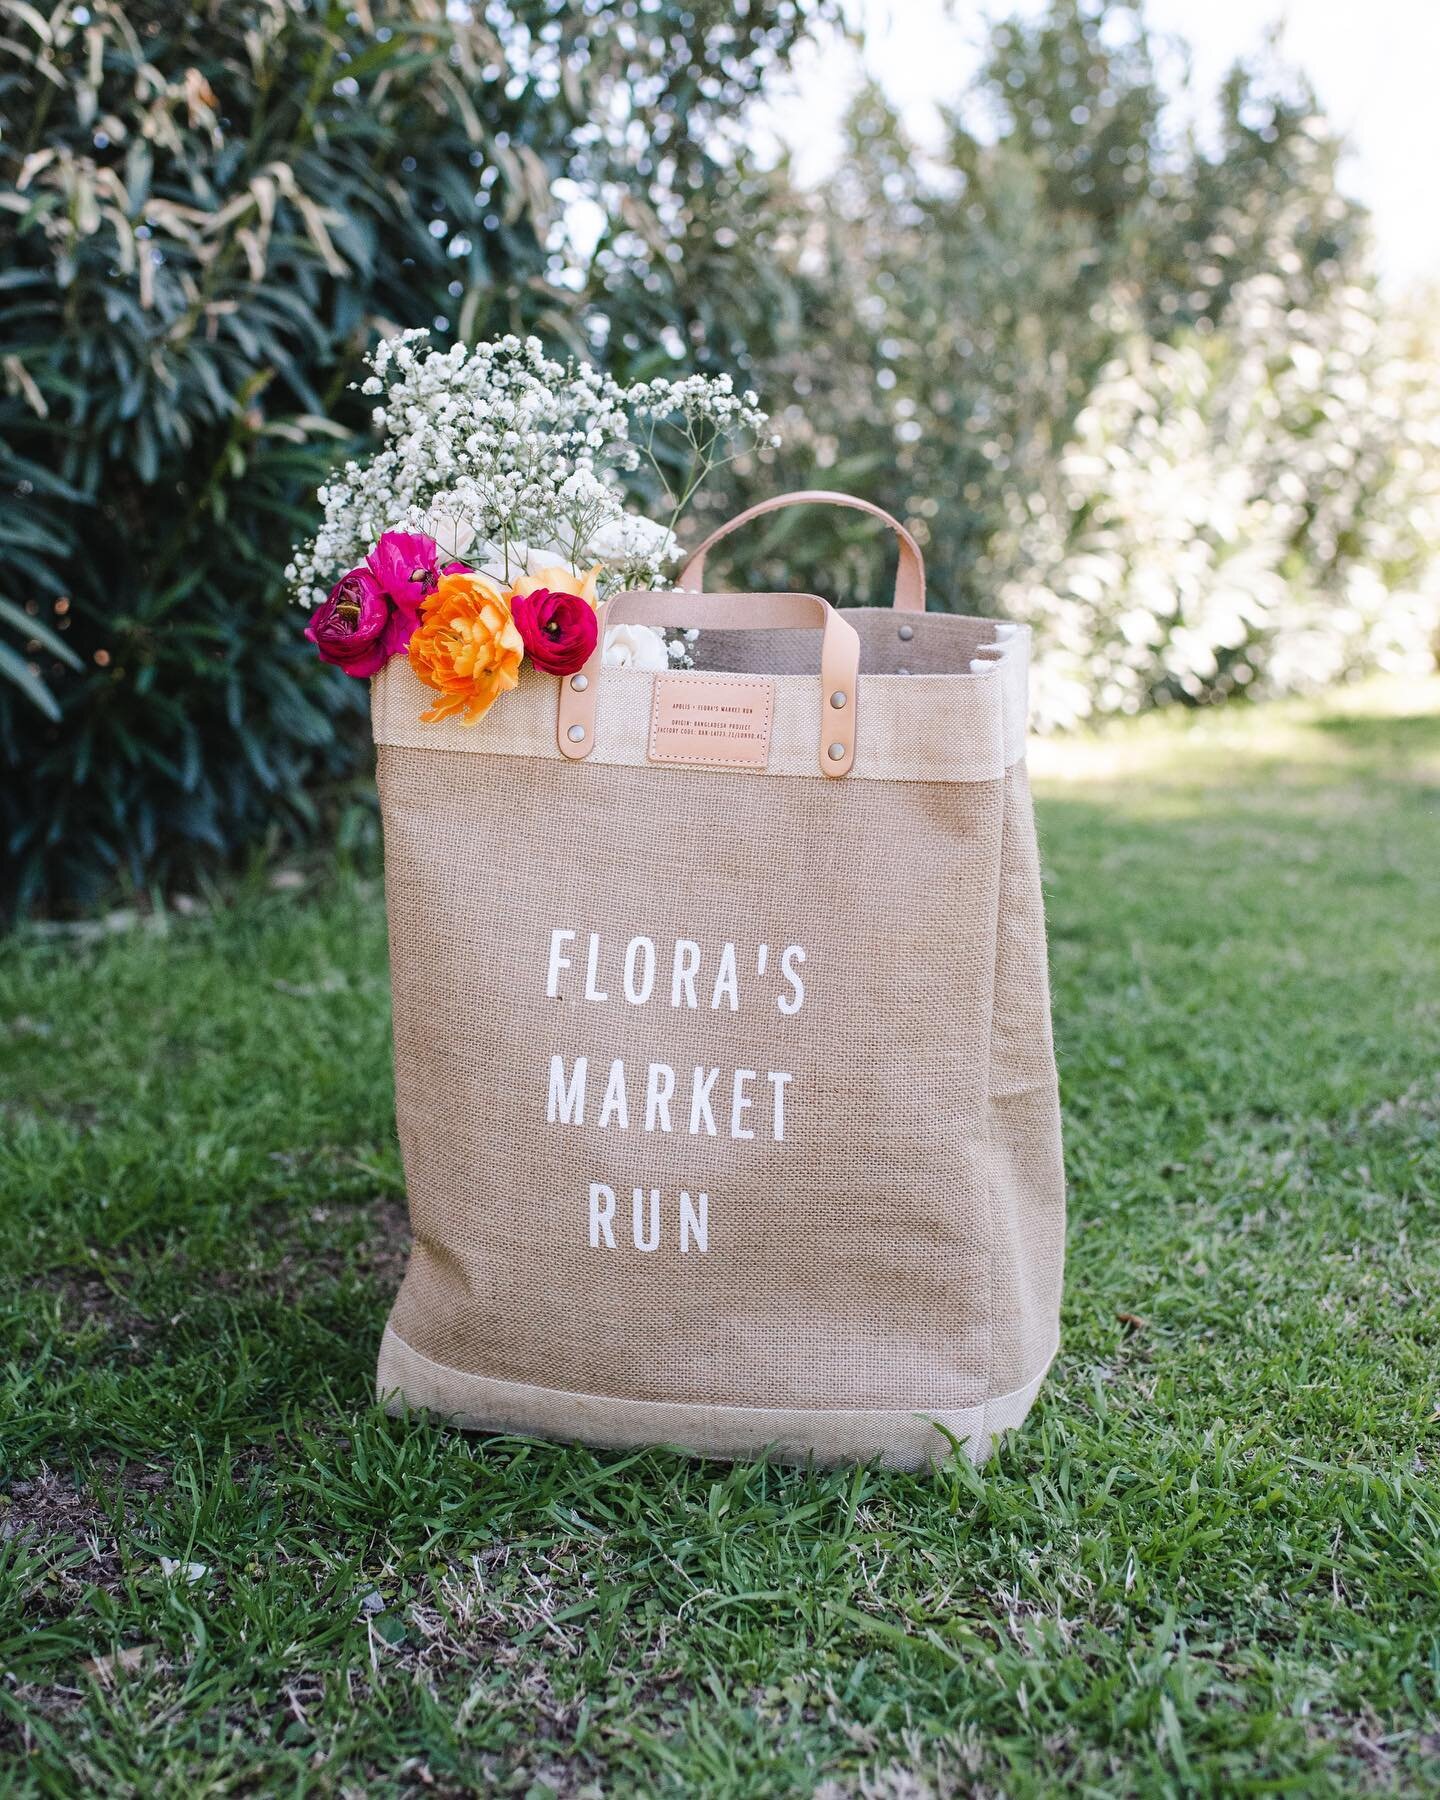 These beauties just arrived! A market tote for all your springtime essentials 😍
#florasmarketrun